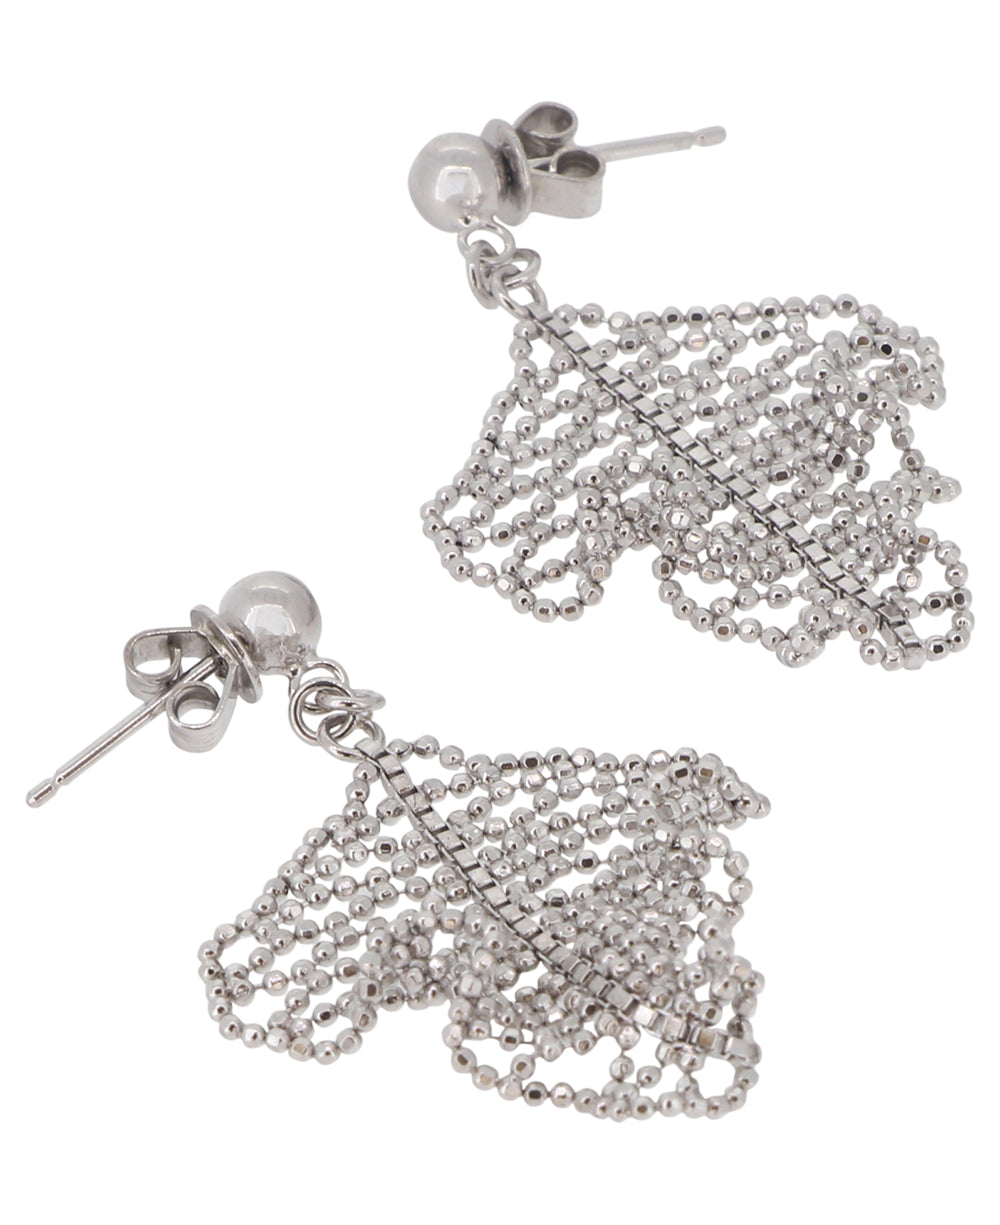 Elegant silver fringe earrings made from fine Hill-Tribe silver, featuring a secure fit